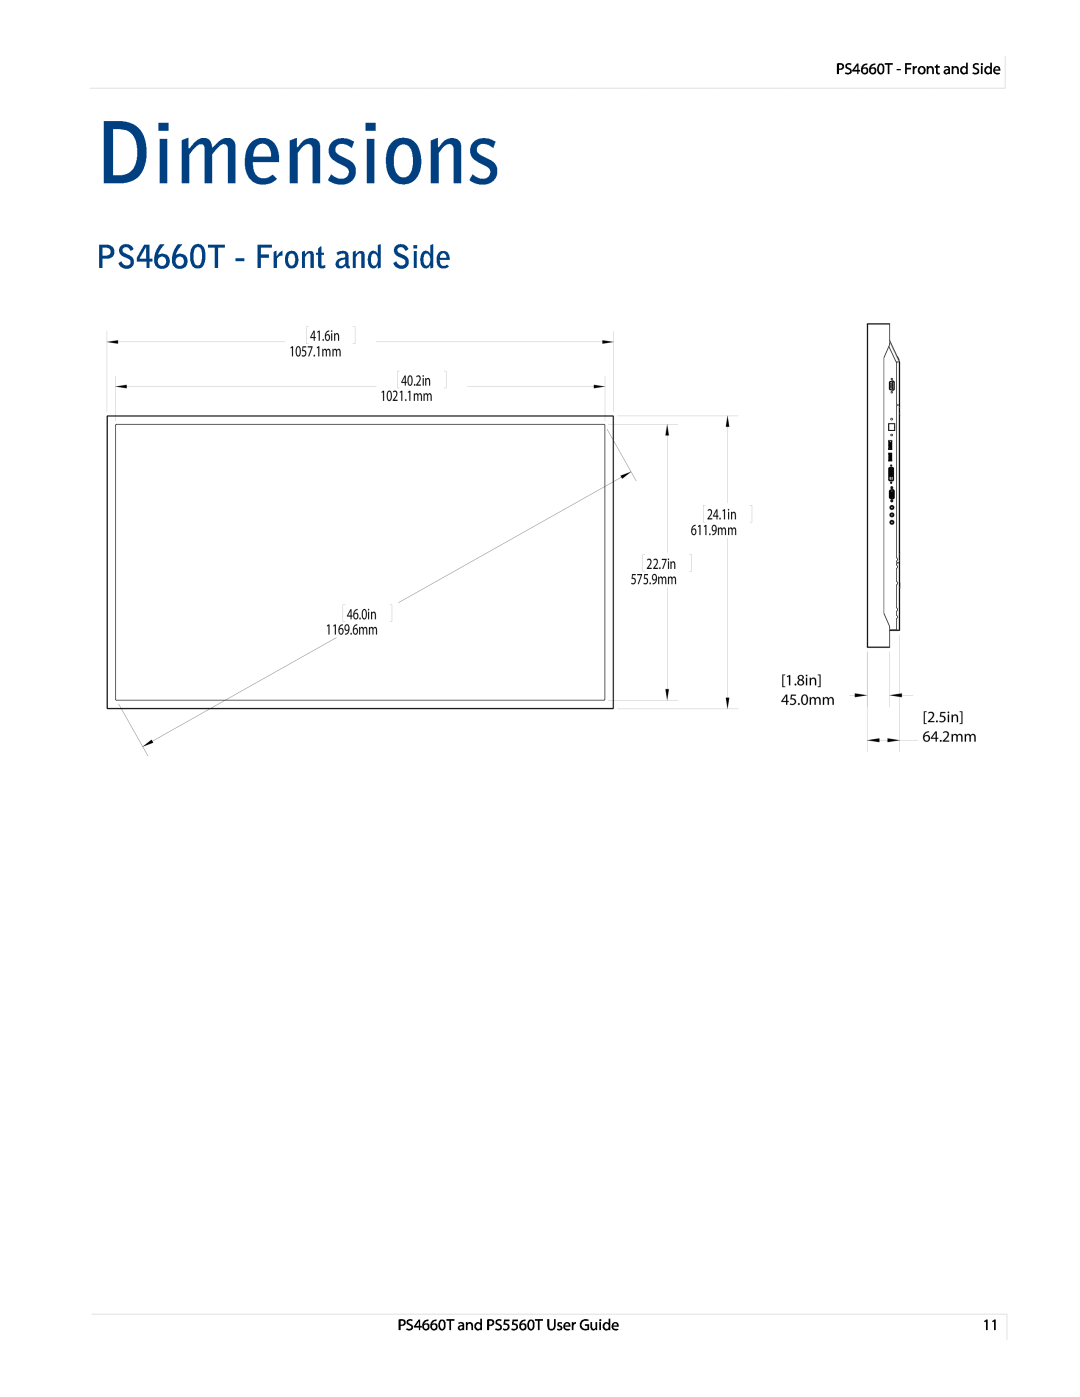 Planar PS466OT, PS4660T and PS5560T user manual Dimensions, PS4660T - Front and Side, 40.2in, 1021.1mm, 2.5in 64.22mm.4in 